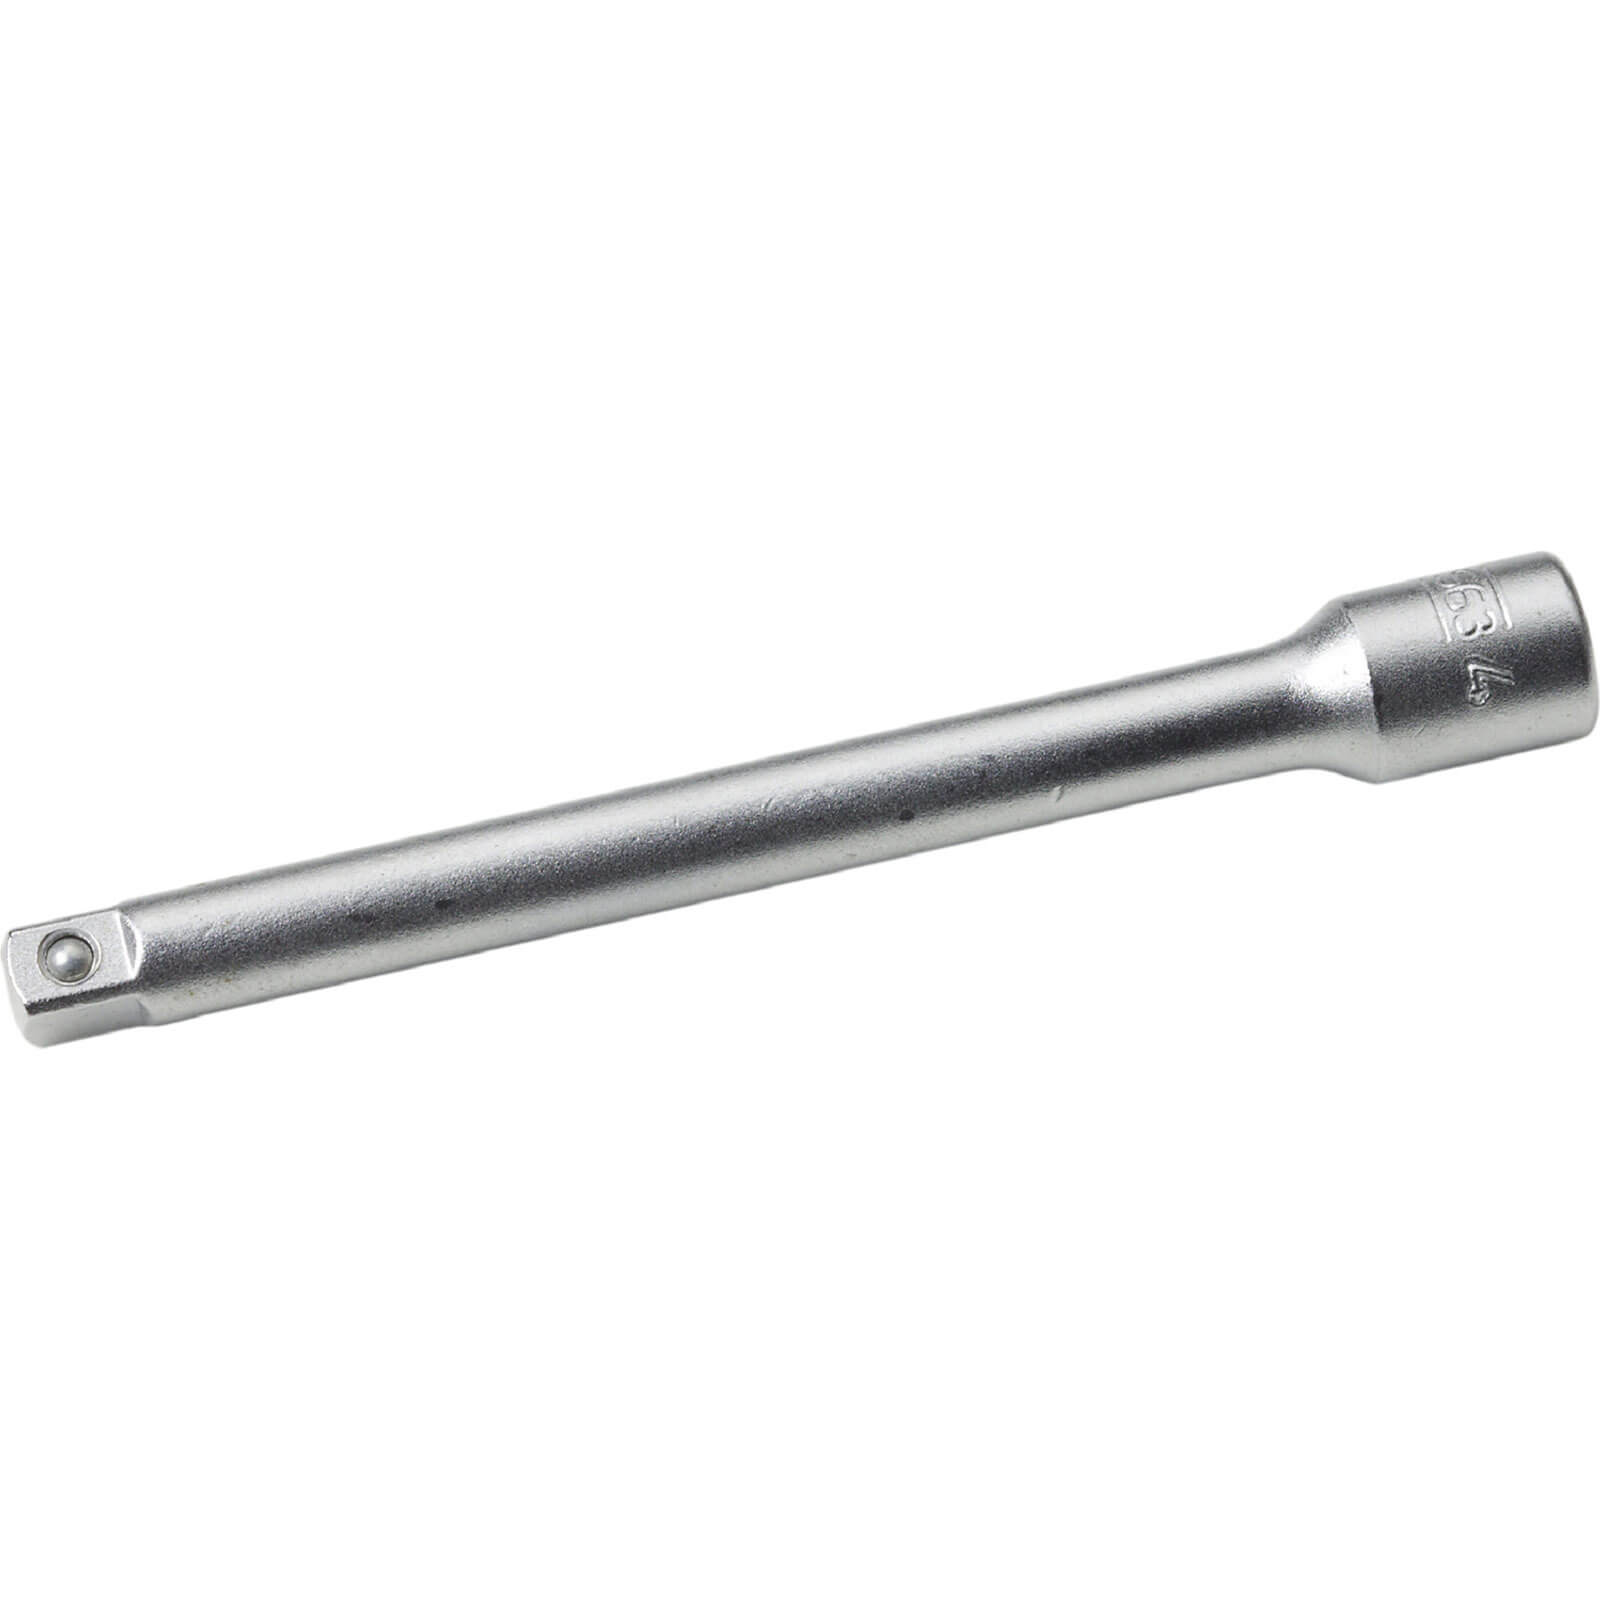 Bahco Extension Bar 2" 1/4" Square Drive Sbs63-2